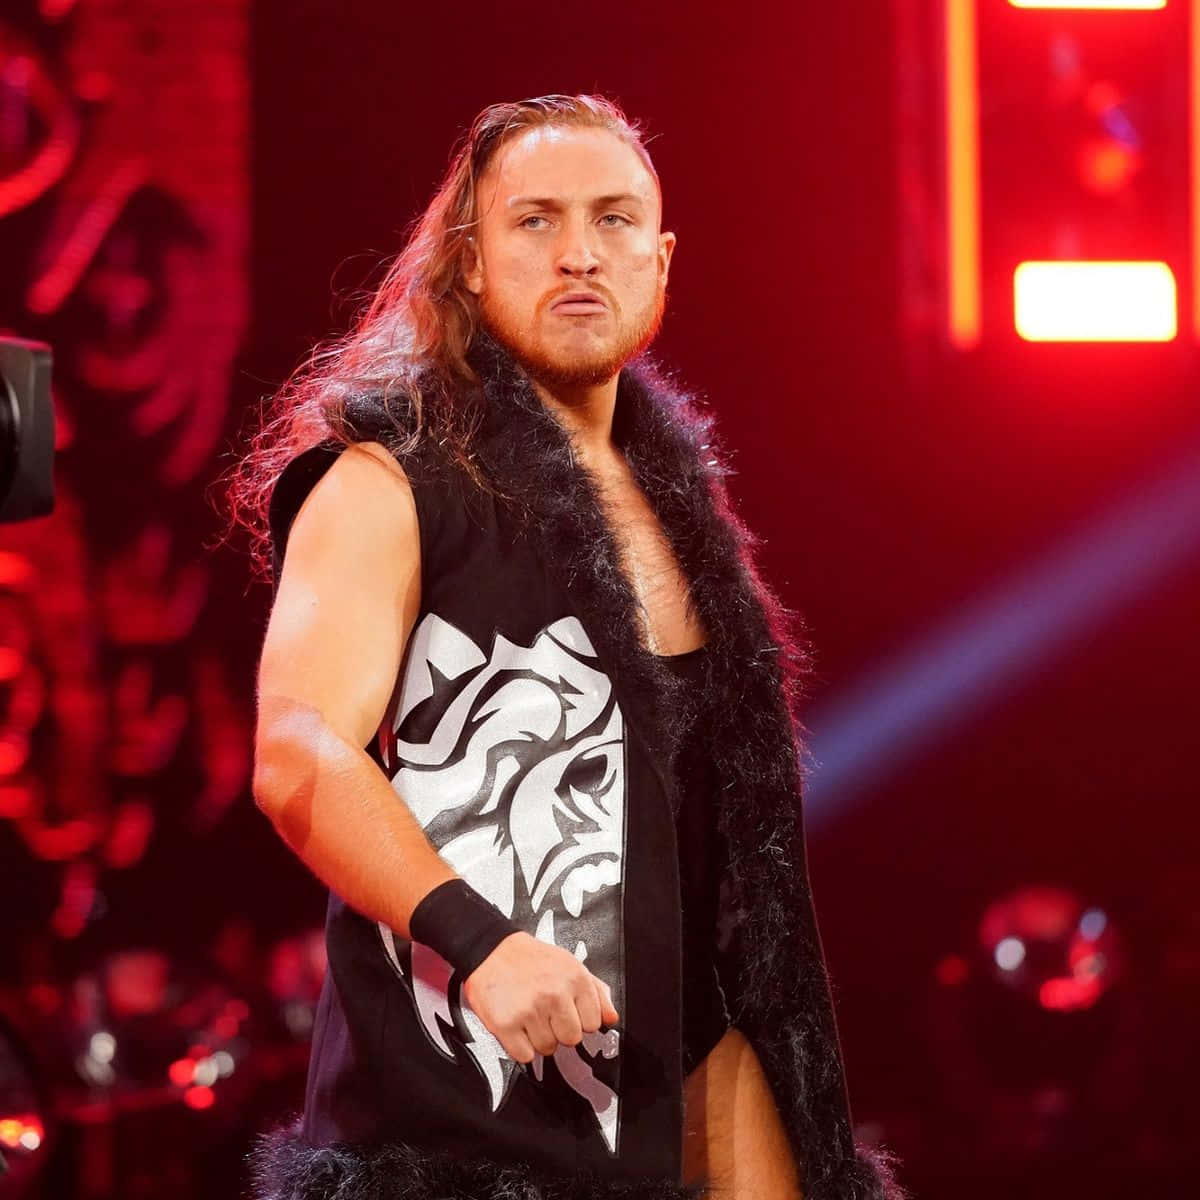 Wwe Star Pete Dunne In Action Background